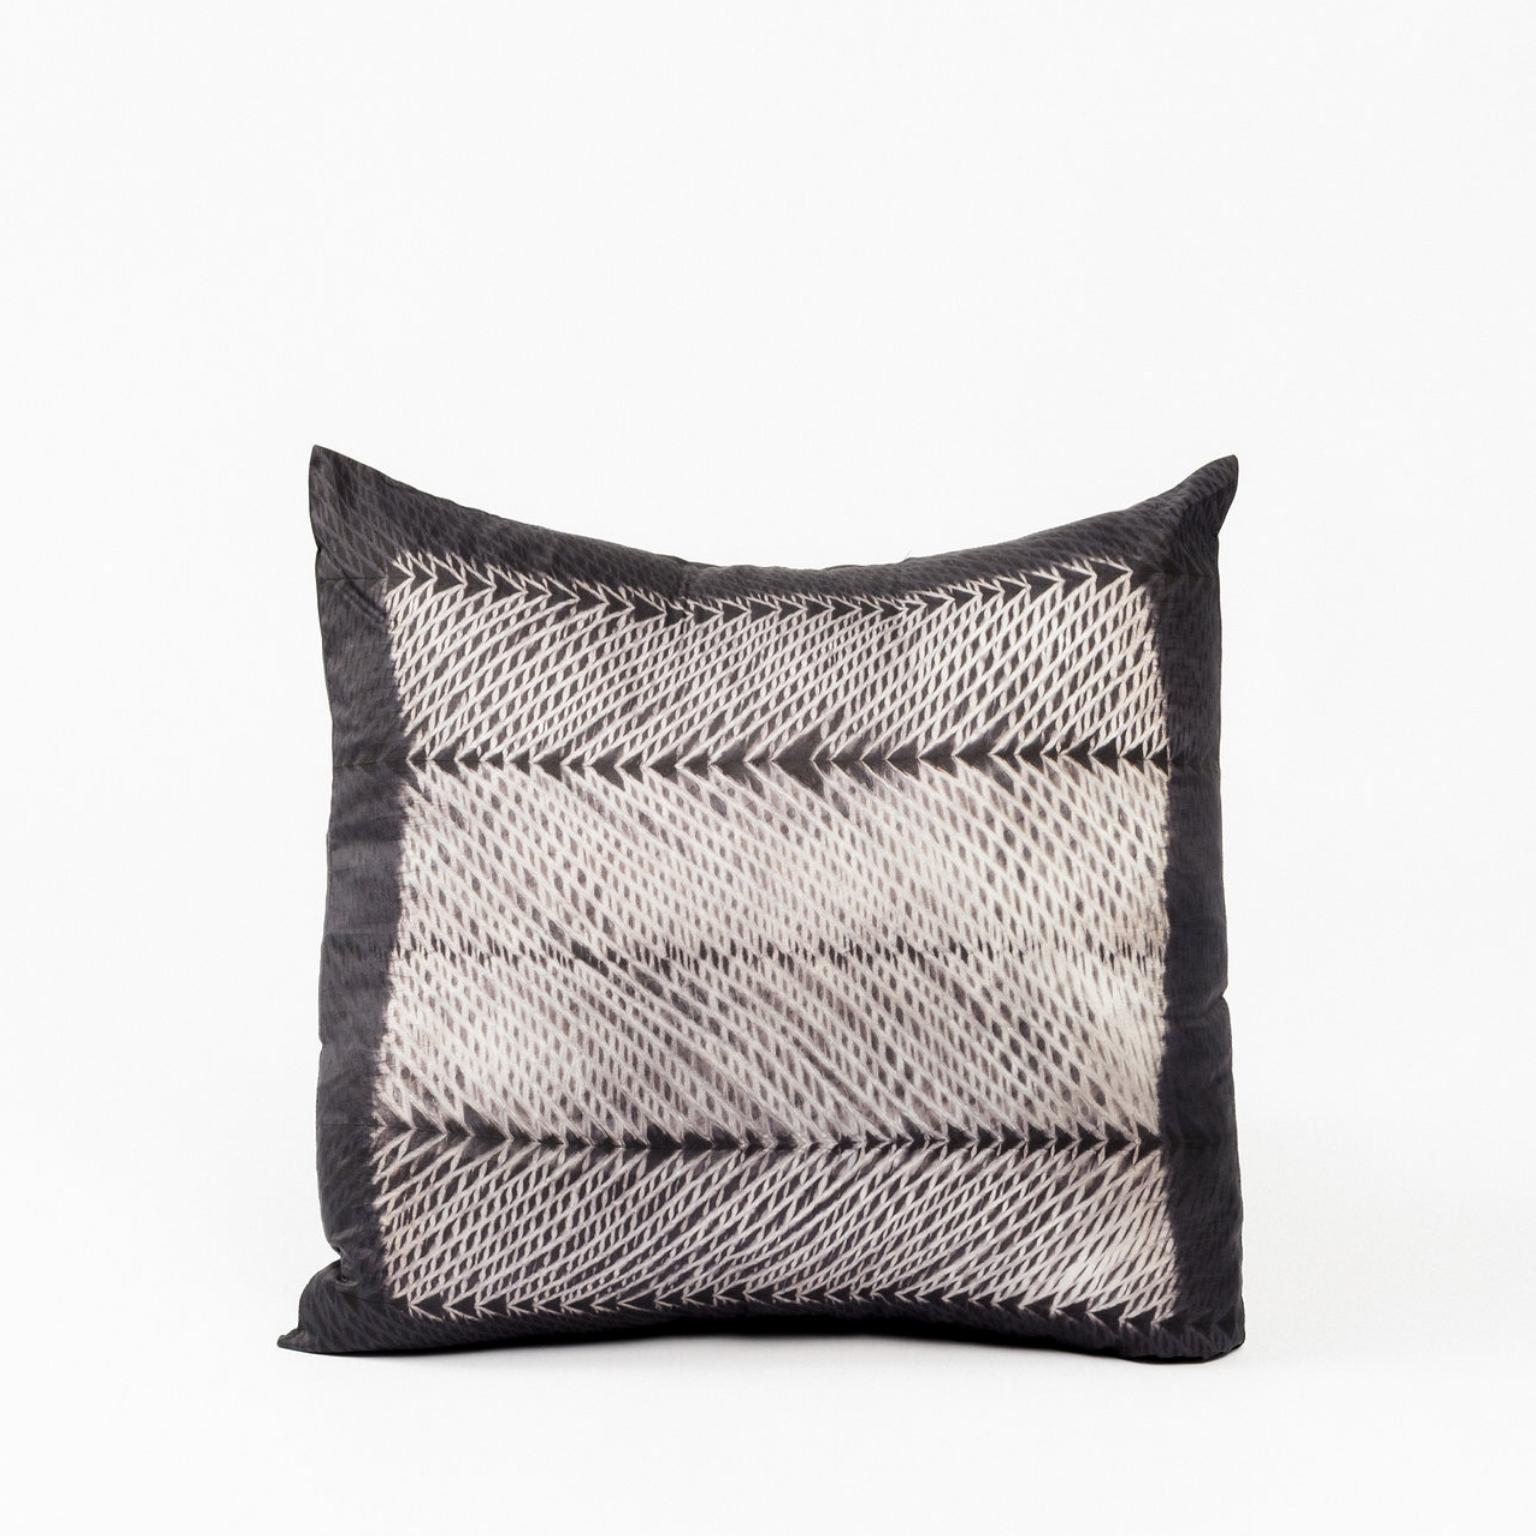 Custom design by Studio Variously, Ara Black Pillow is handmade by master artisans in India. A sustainable design brand based out of Michigan, Studio Variously exclusively collaborates with artisan communities to restore and revive ancient